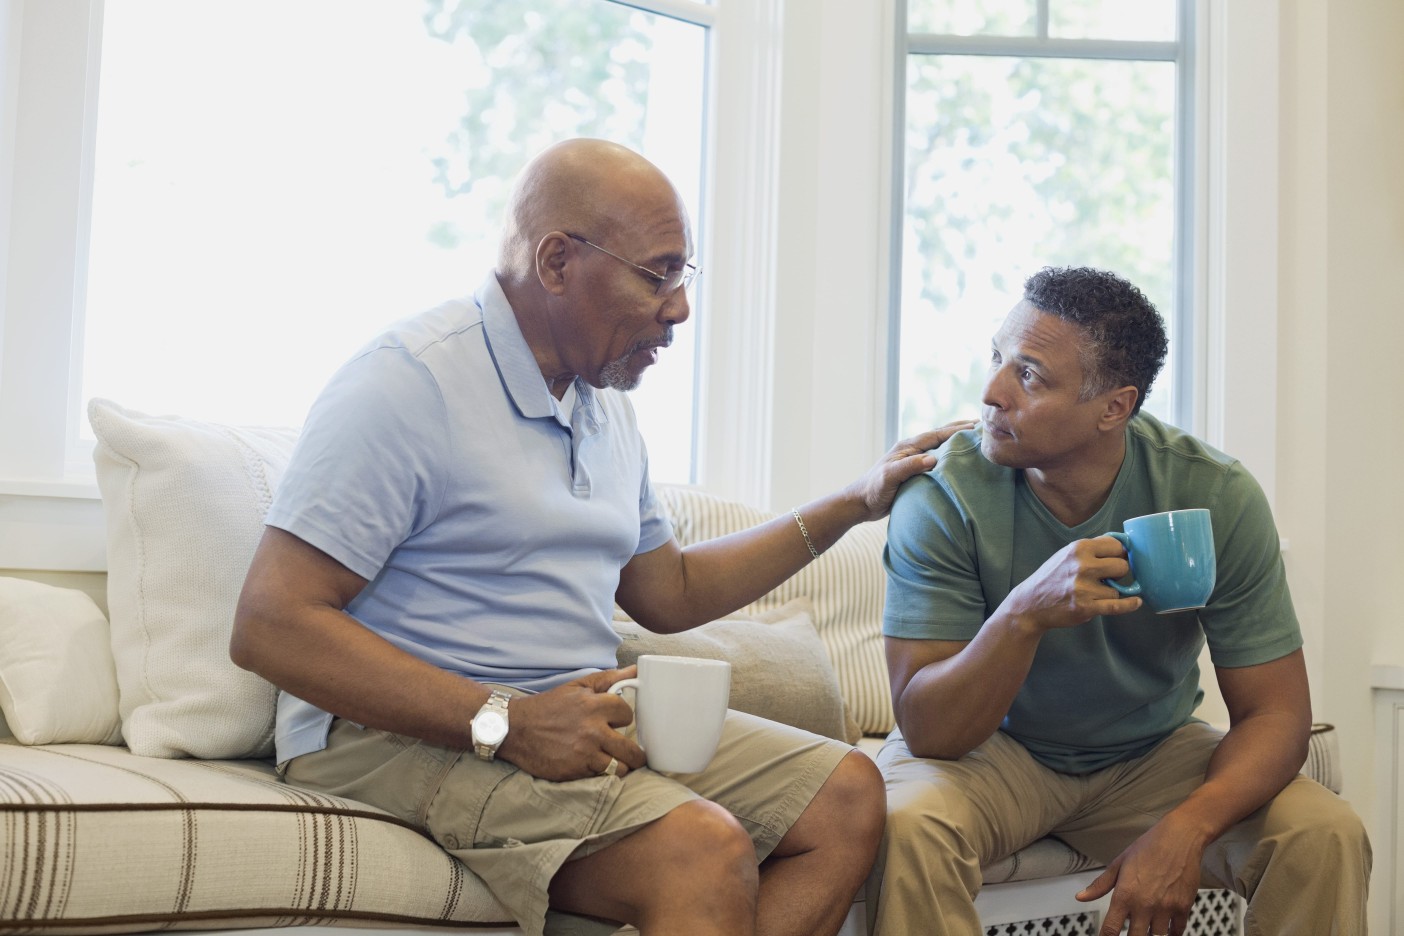 Two men drinking coffee discuss urologic cancer support groups in a well-lit living room